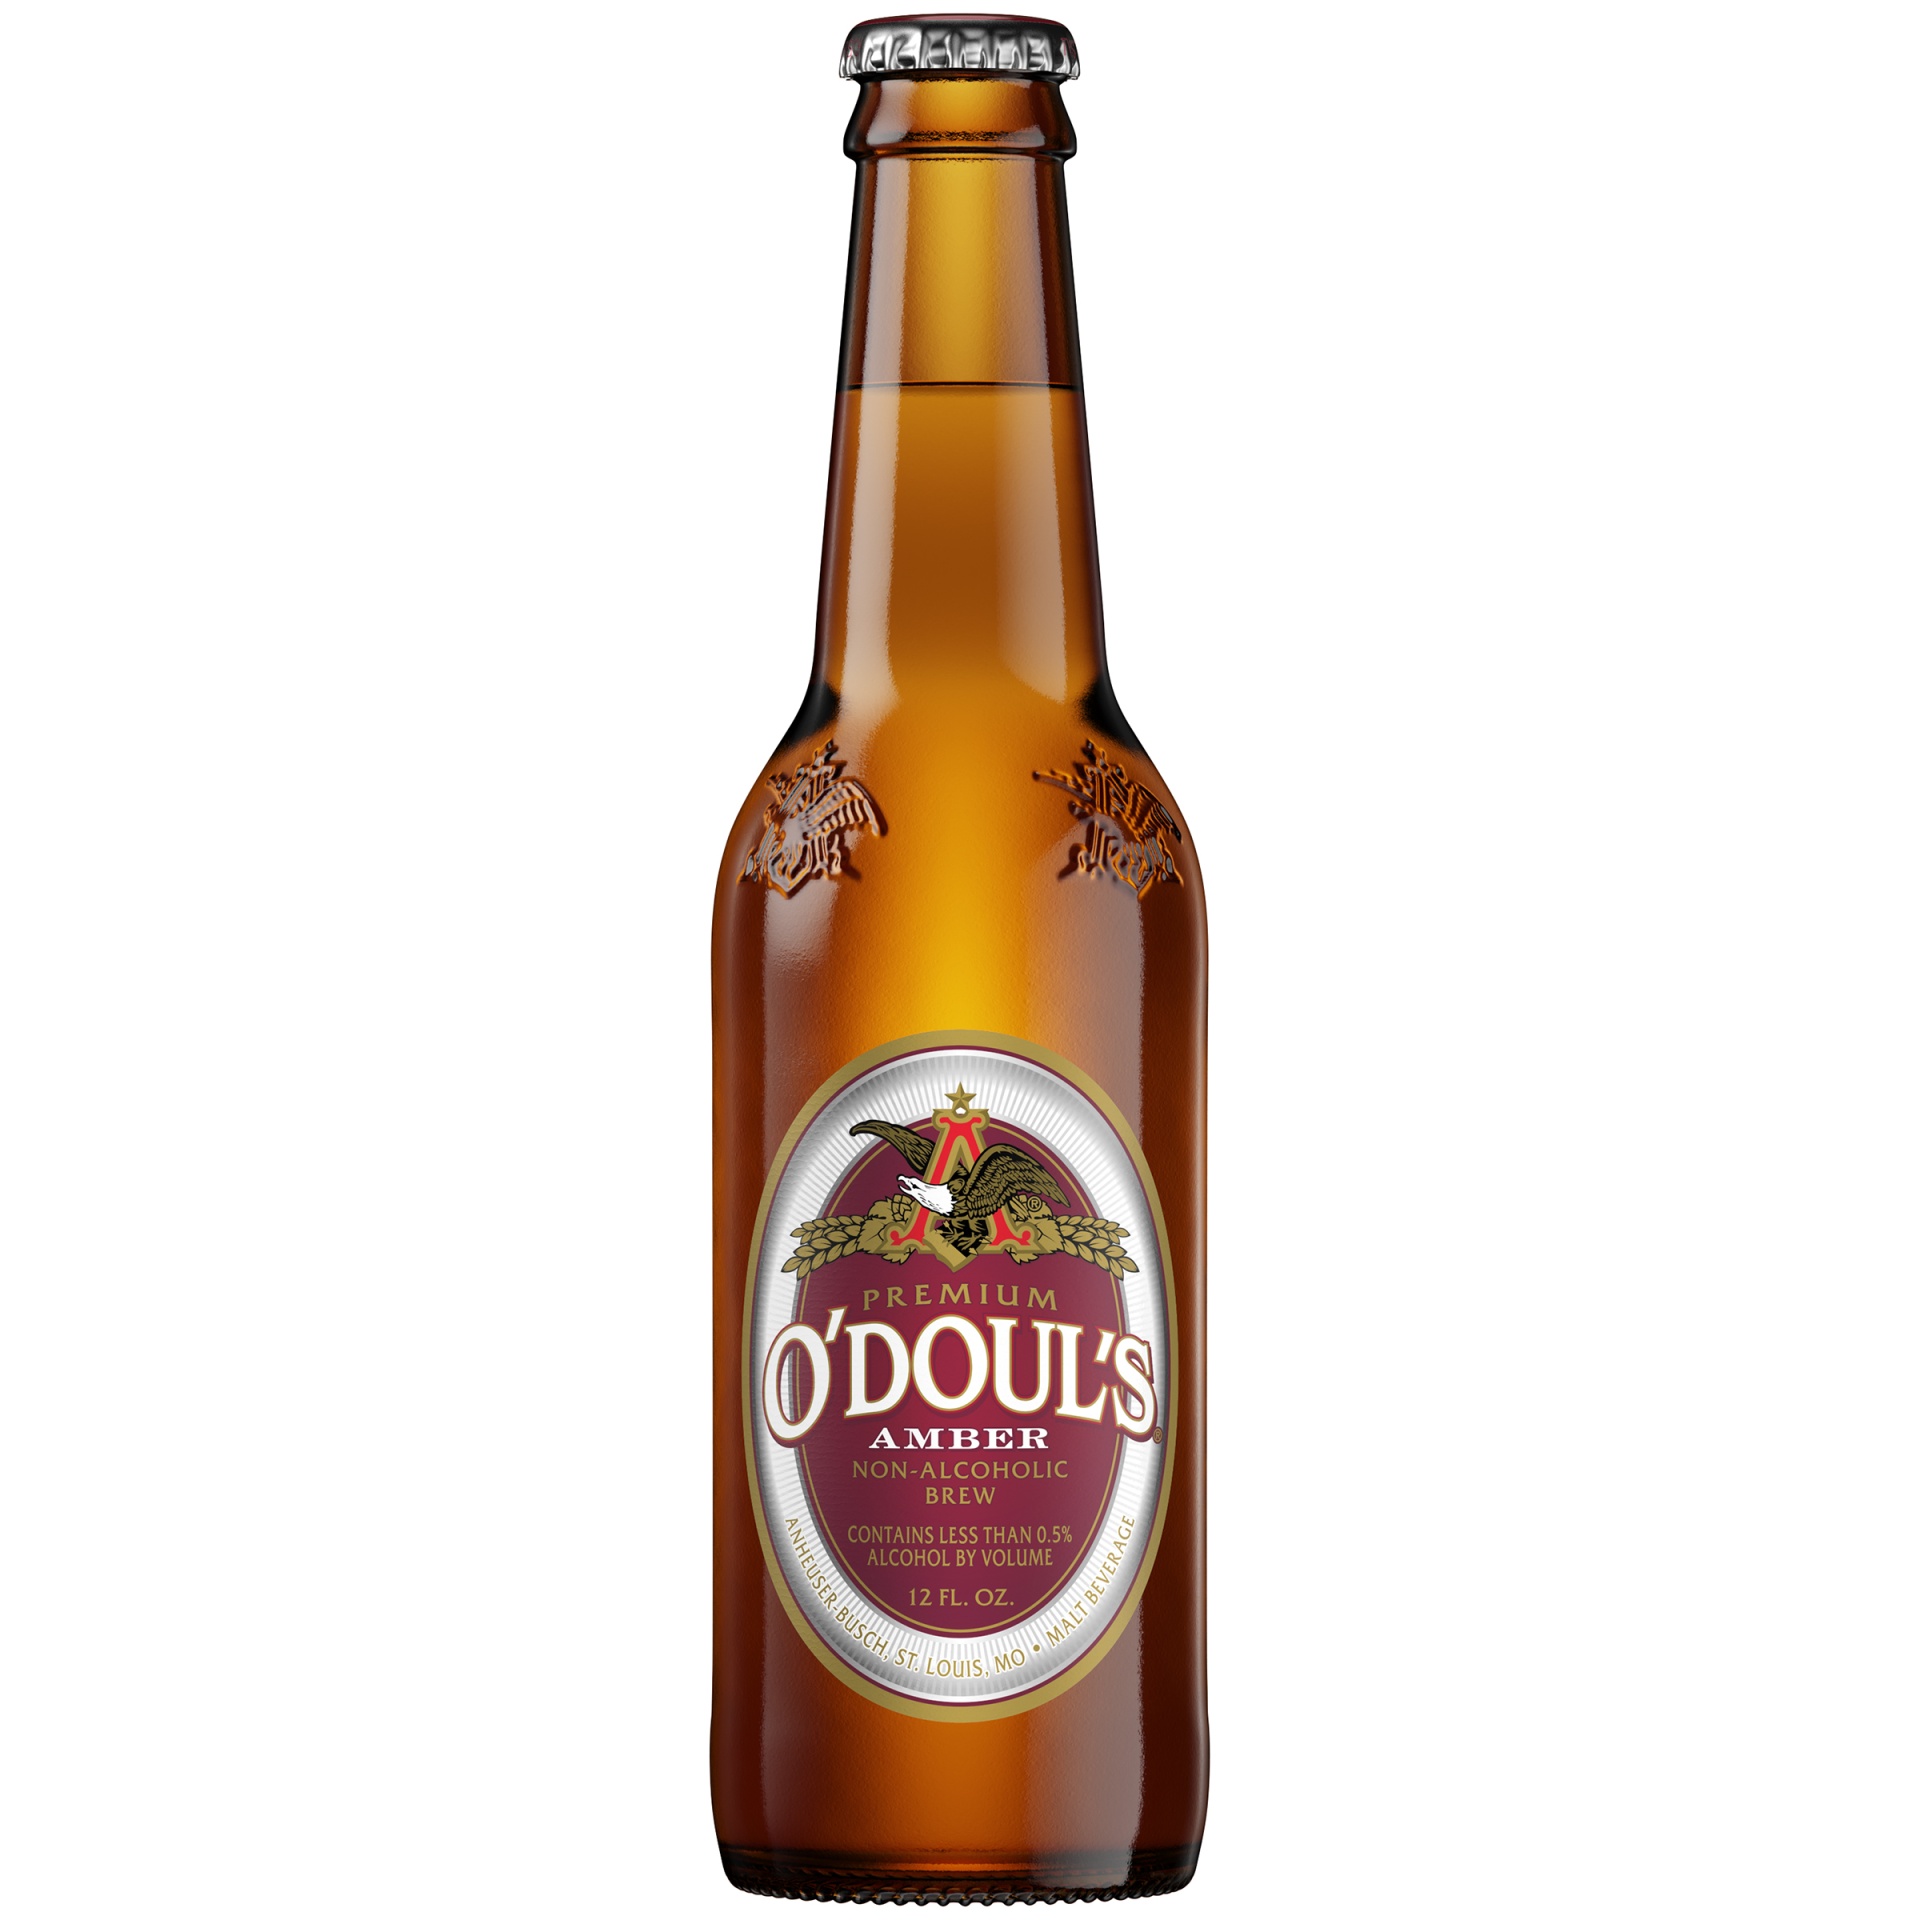 slide 1 of 1, O'Doul's Premium Amber Non-Alcoholic Beer, 0.5% ABV, 12 oz